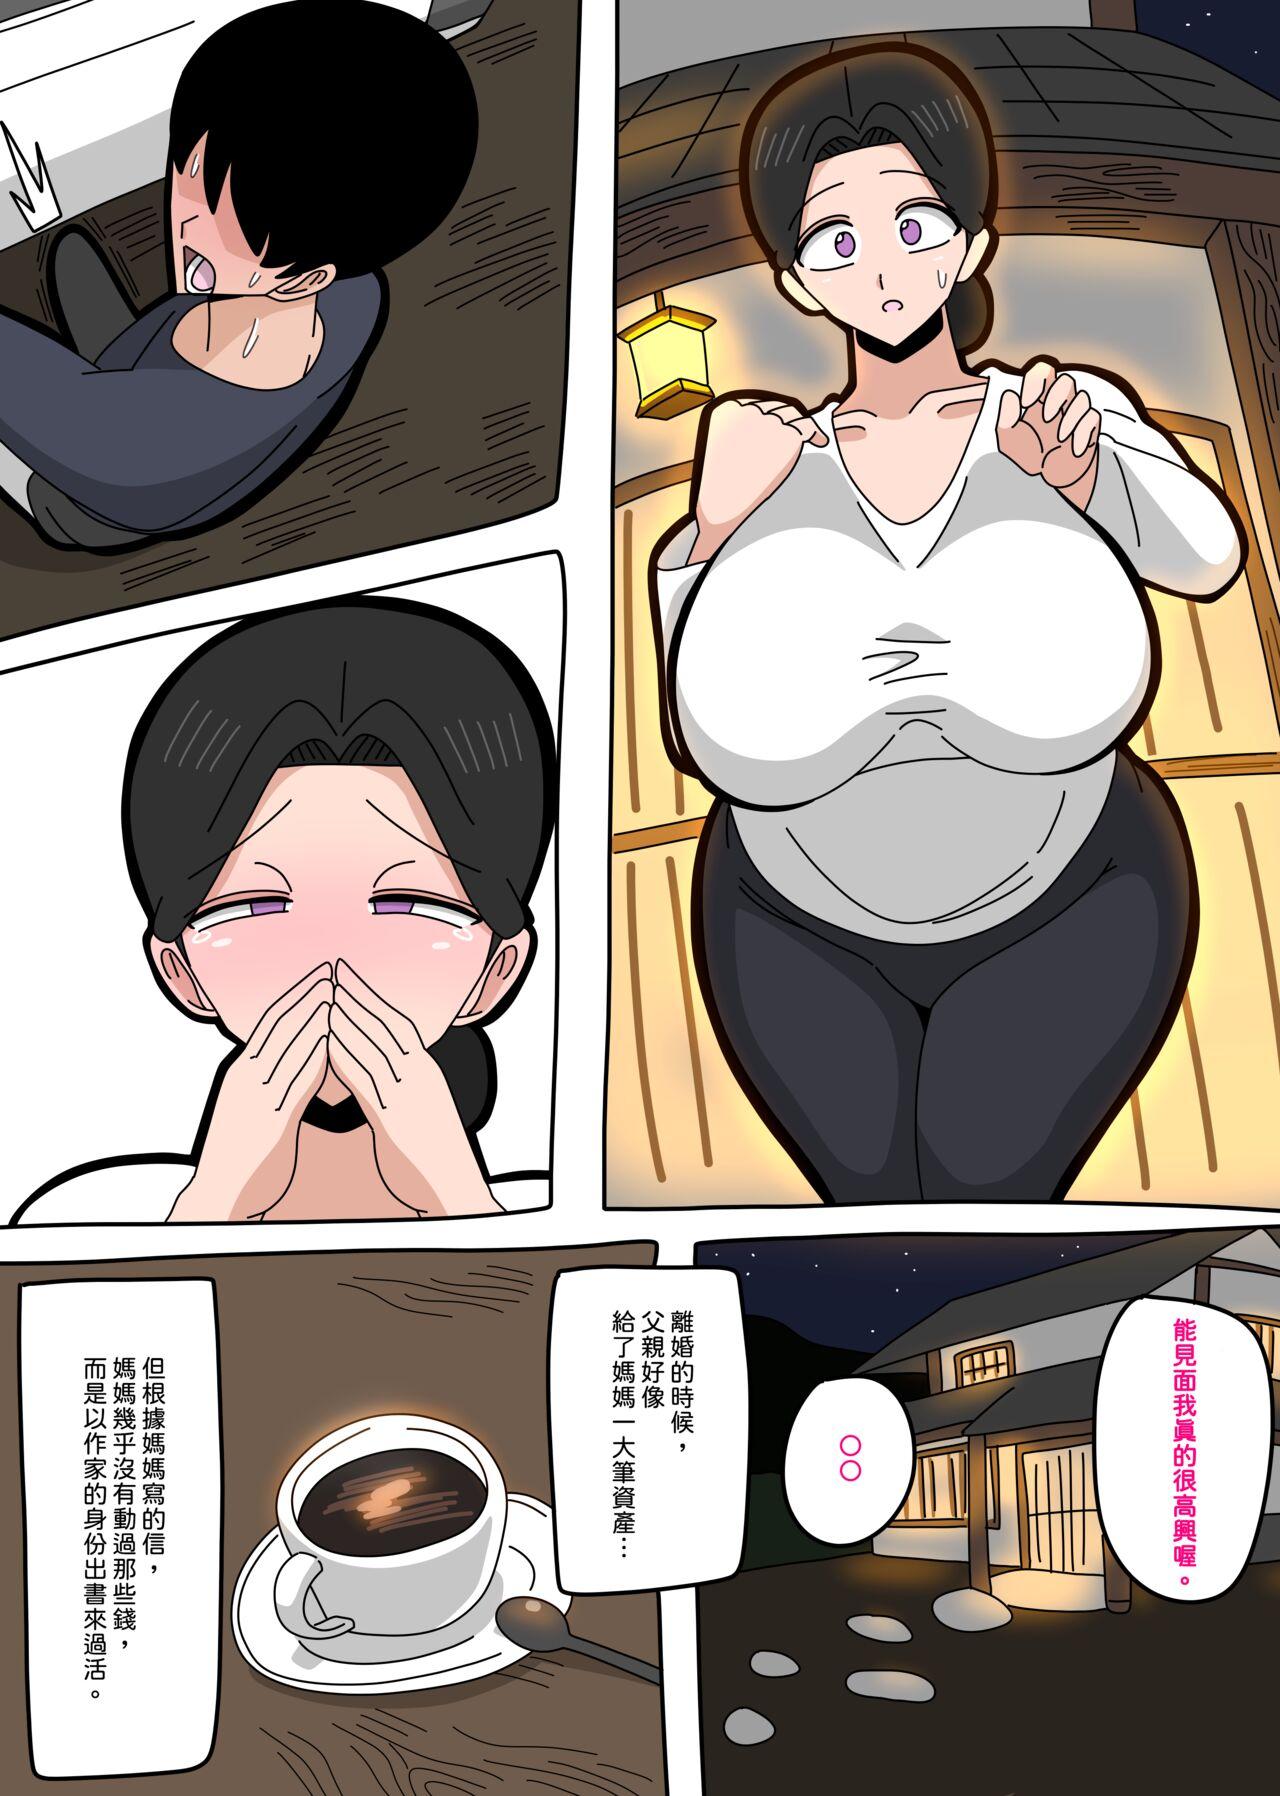 Chica [18master] 2023-5-24 Meeting mom again after a long separation | 與媽媽重逢… [Chinese][興趣使然的個人機翻] - Original Erotic - Page 2